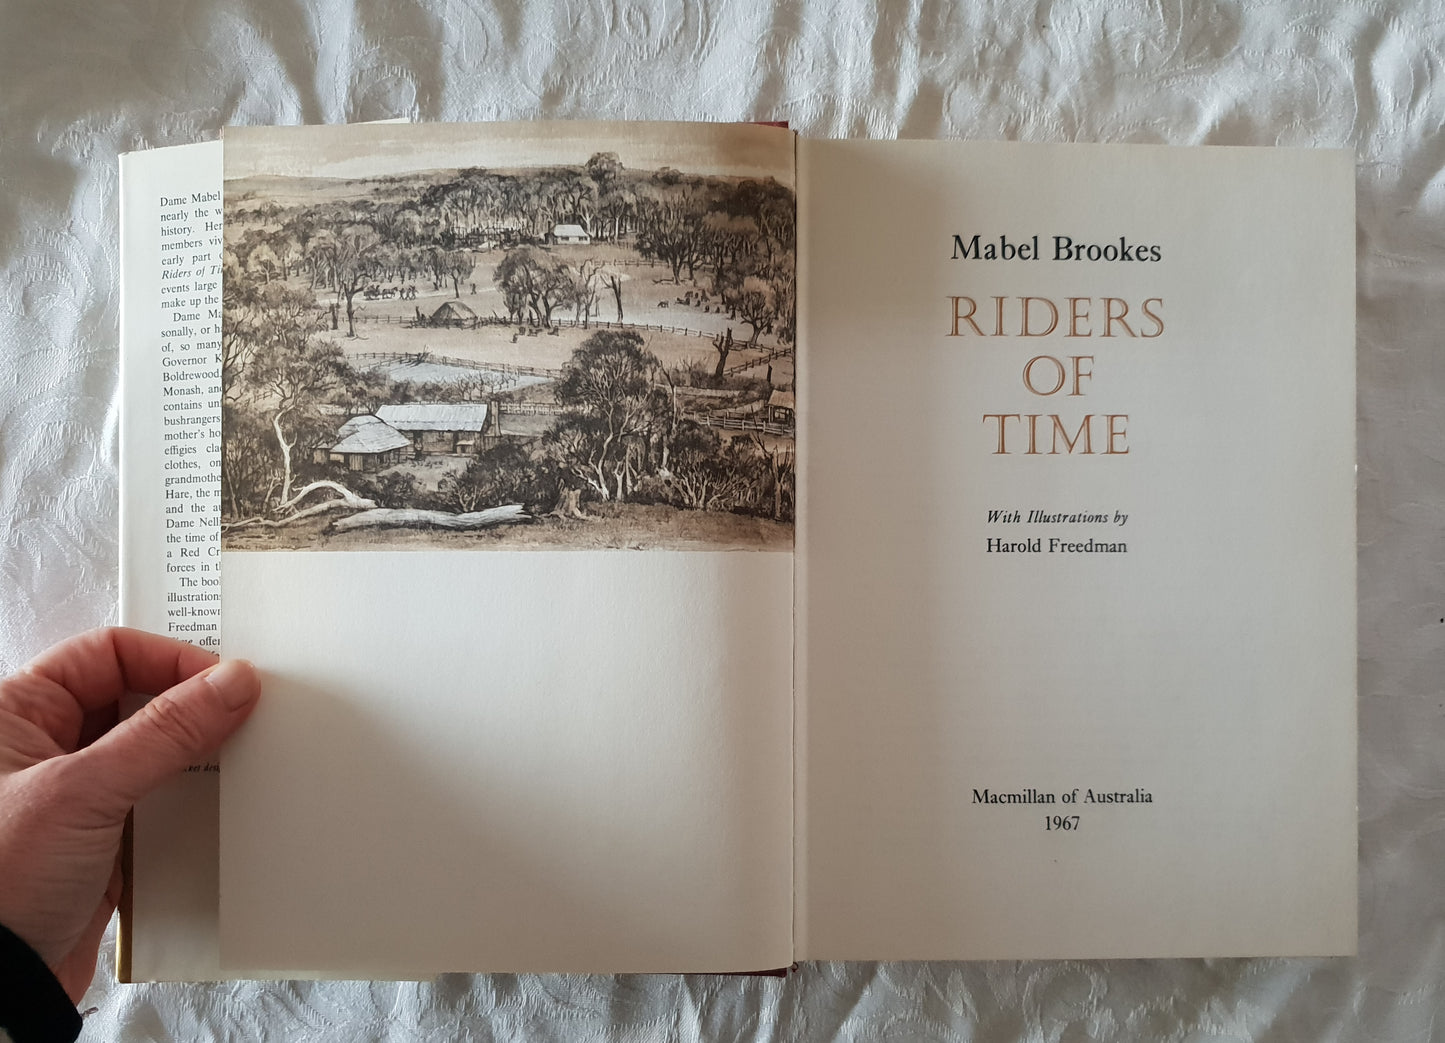 Riders Of Time by Mabel Brookes